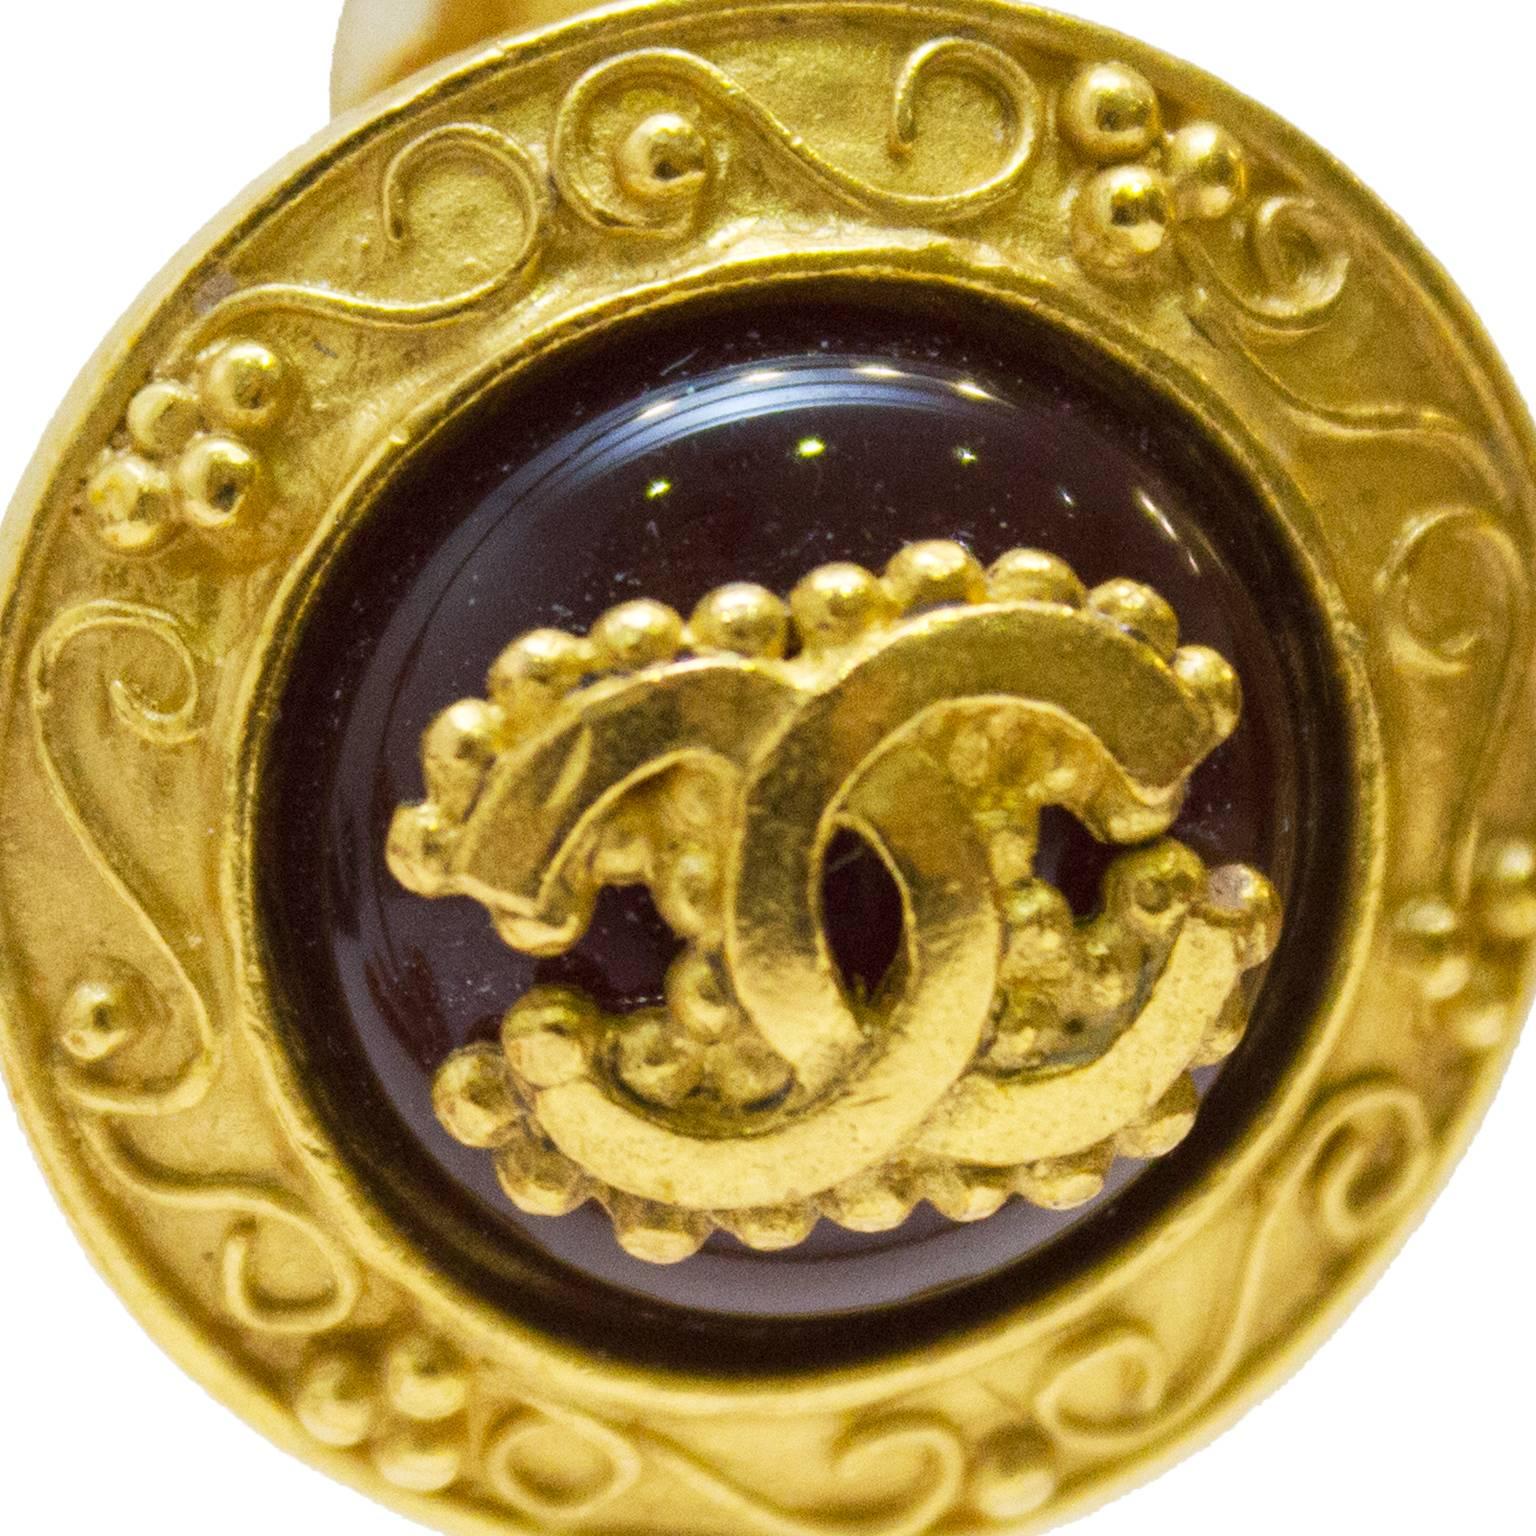 Chanel collection 1996 autumn gold plated and wine colored glass clip on earring. Lovely articulated borders with bead and swirl design. Center glass/resin is deep wine color with mounted CC logo gold plated decorative detail. In excellent